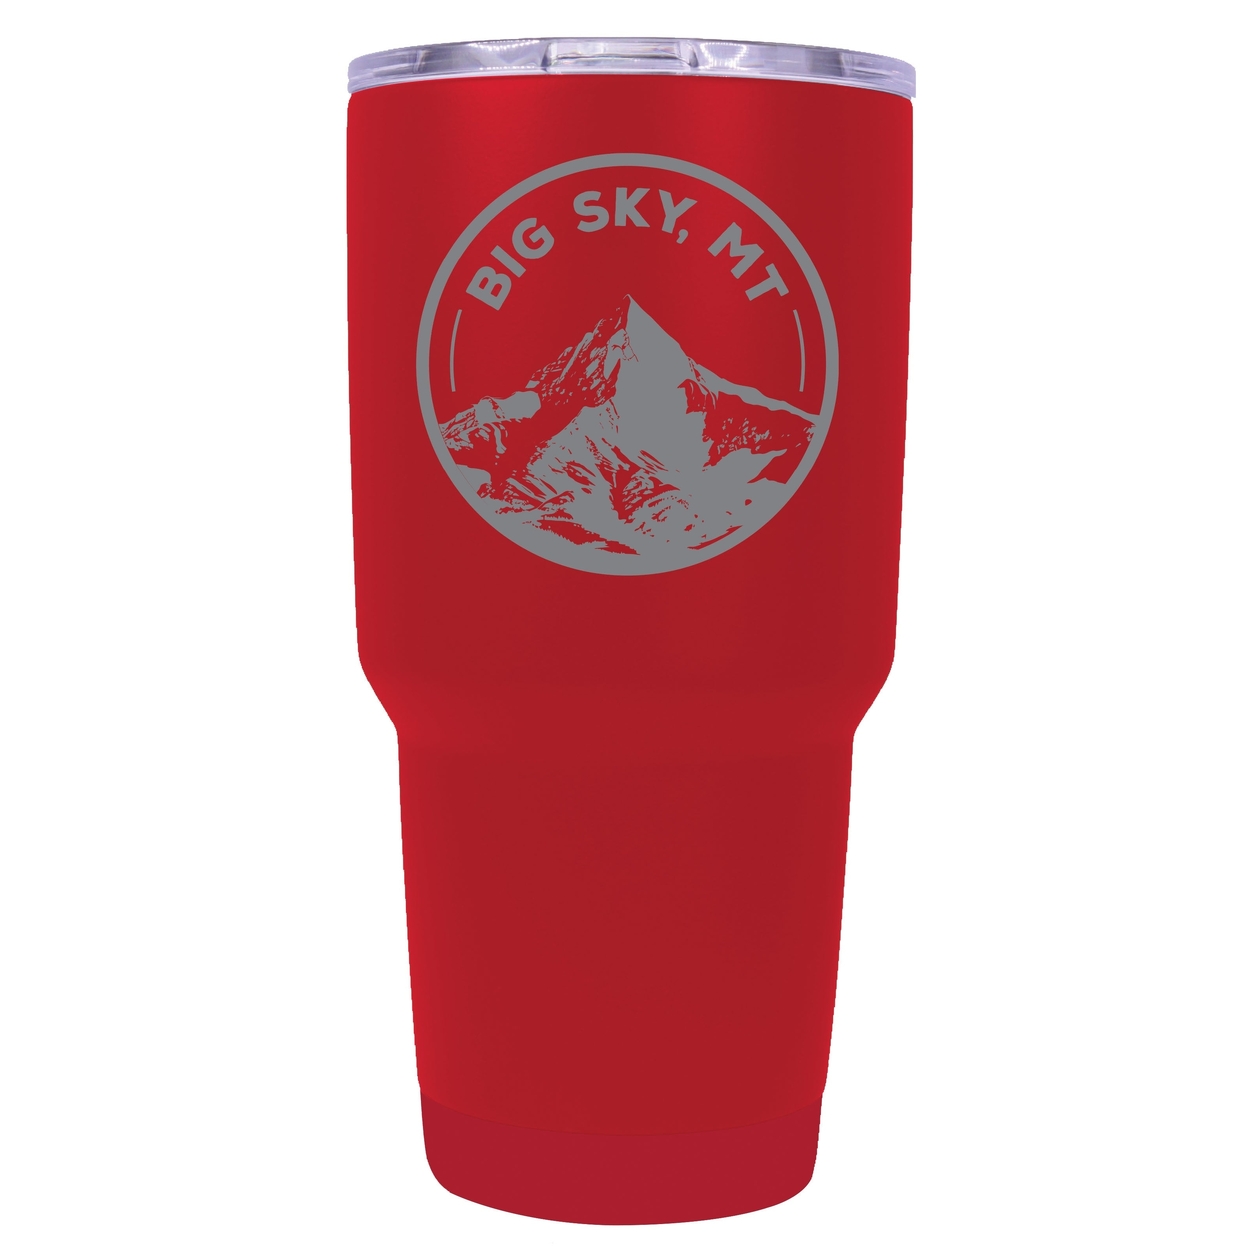 Big Sky Montana Souvenir 24 Oz Engraved Insulated Stainless Steel Tumbler - Black,,4-Pack